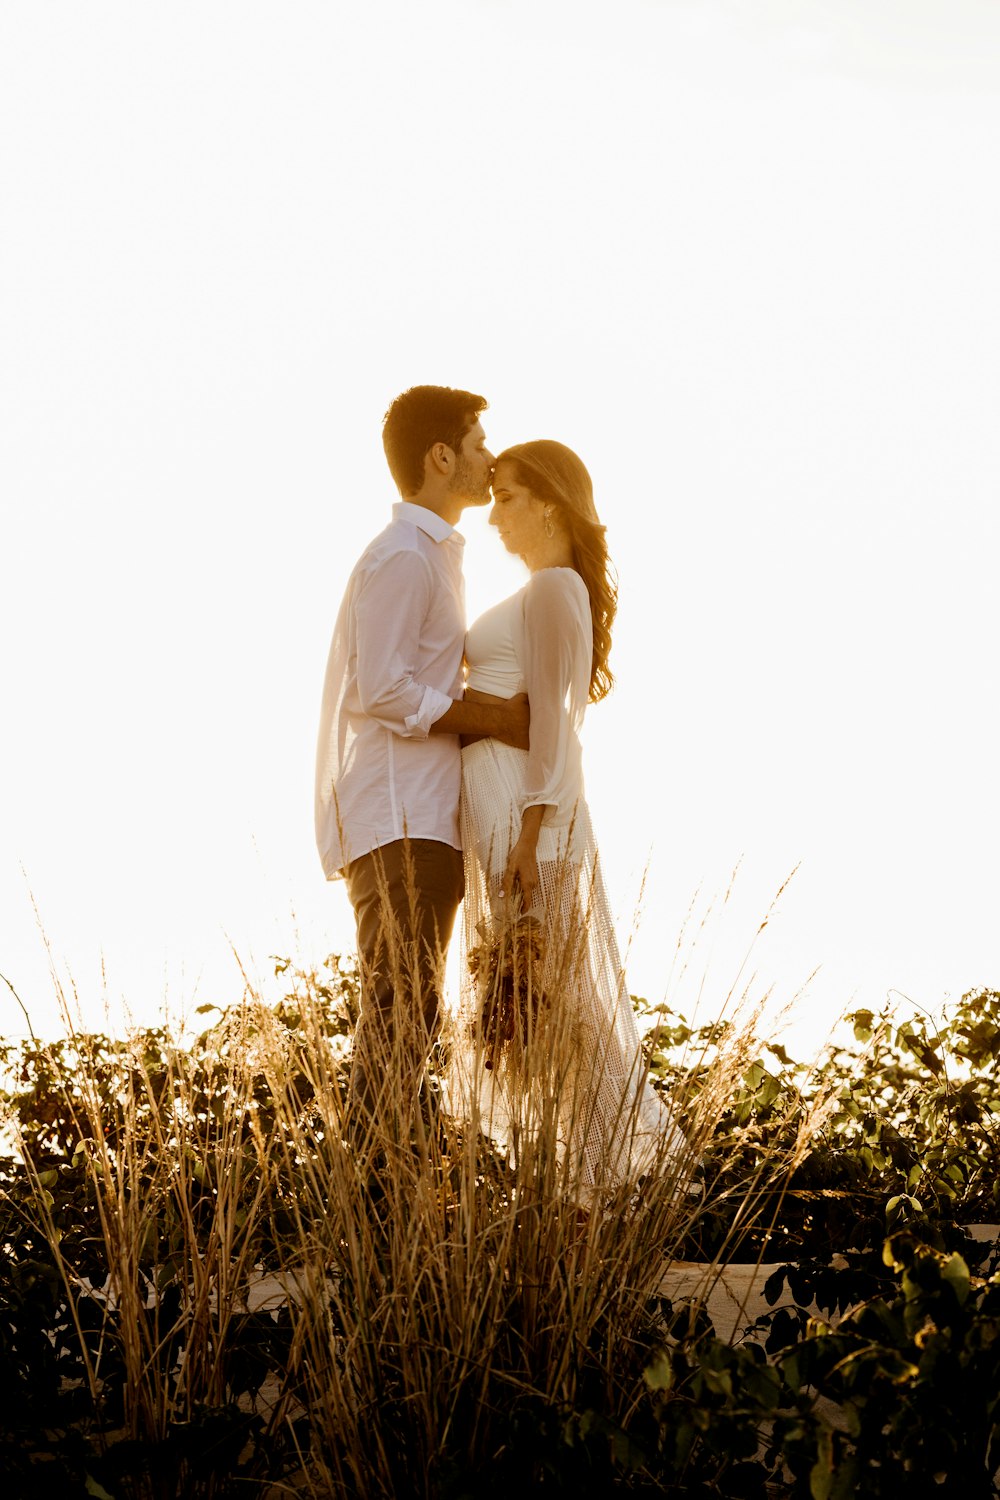 man and woman kissing on grass field during daytime